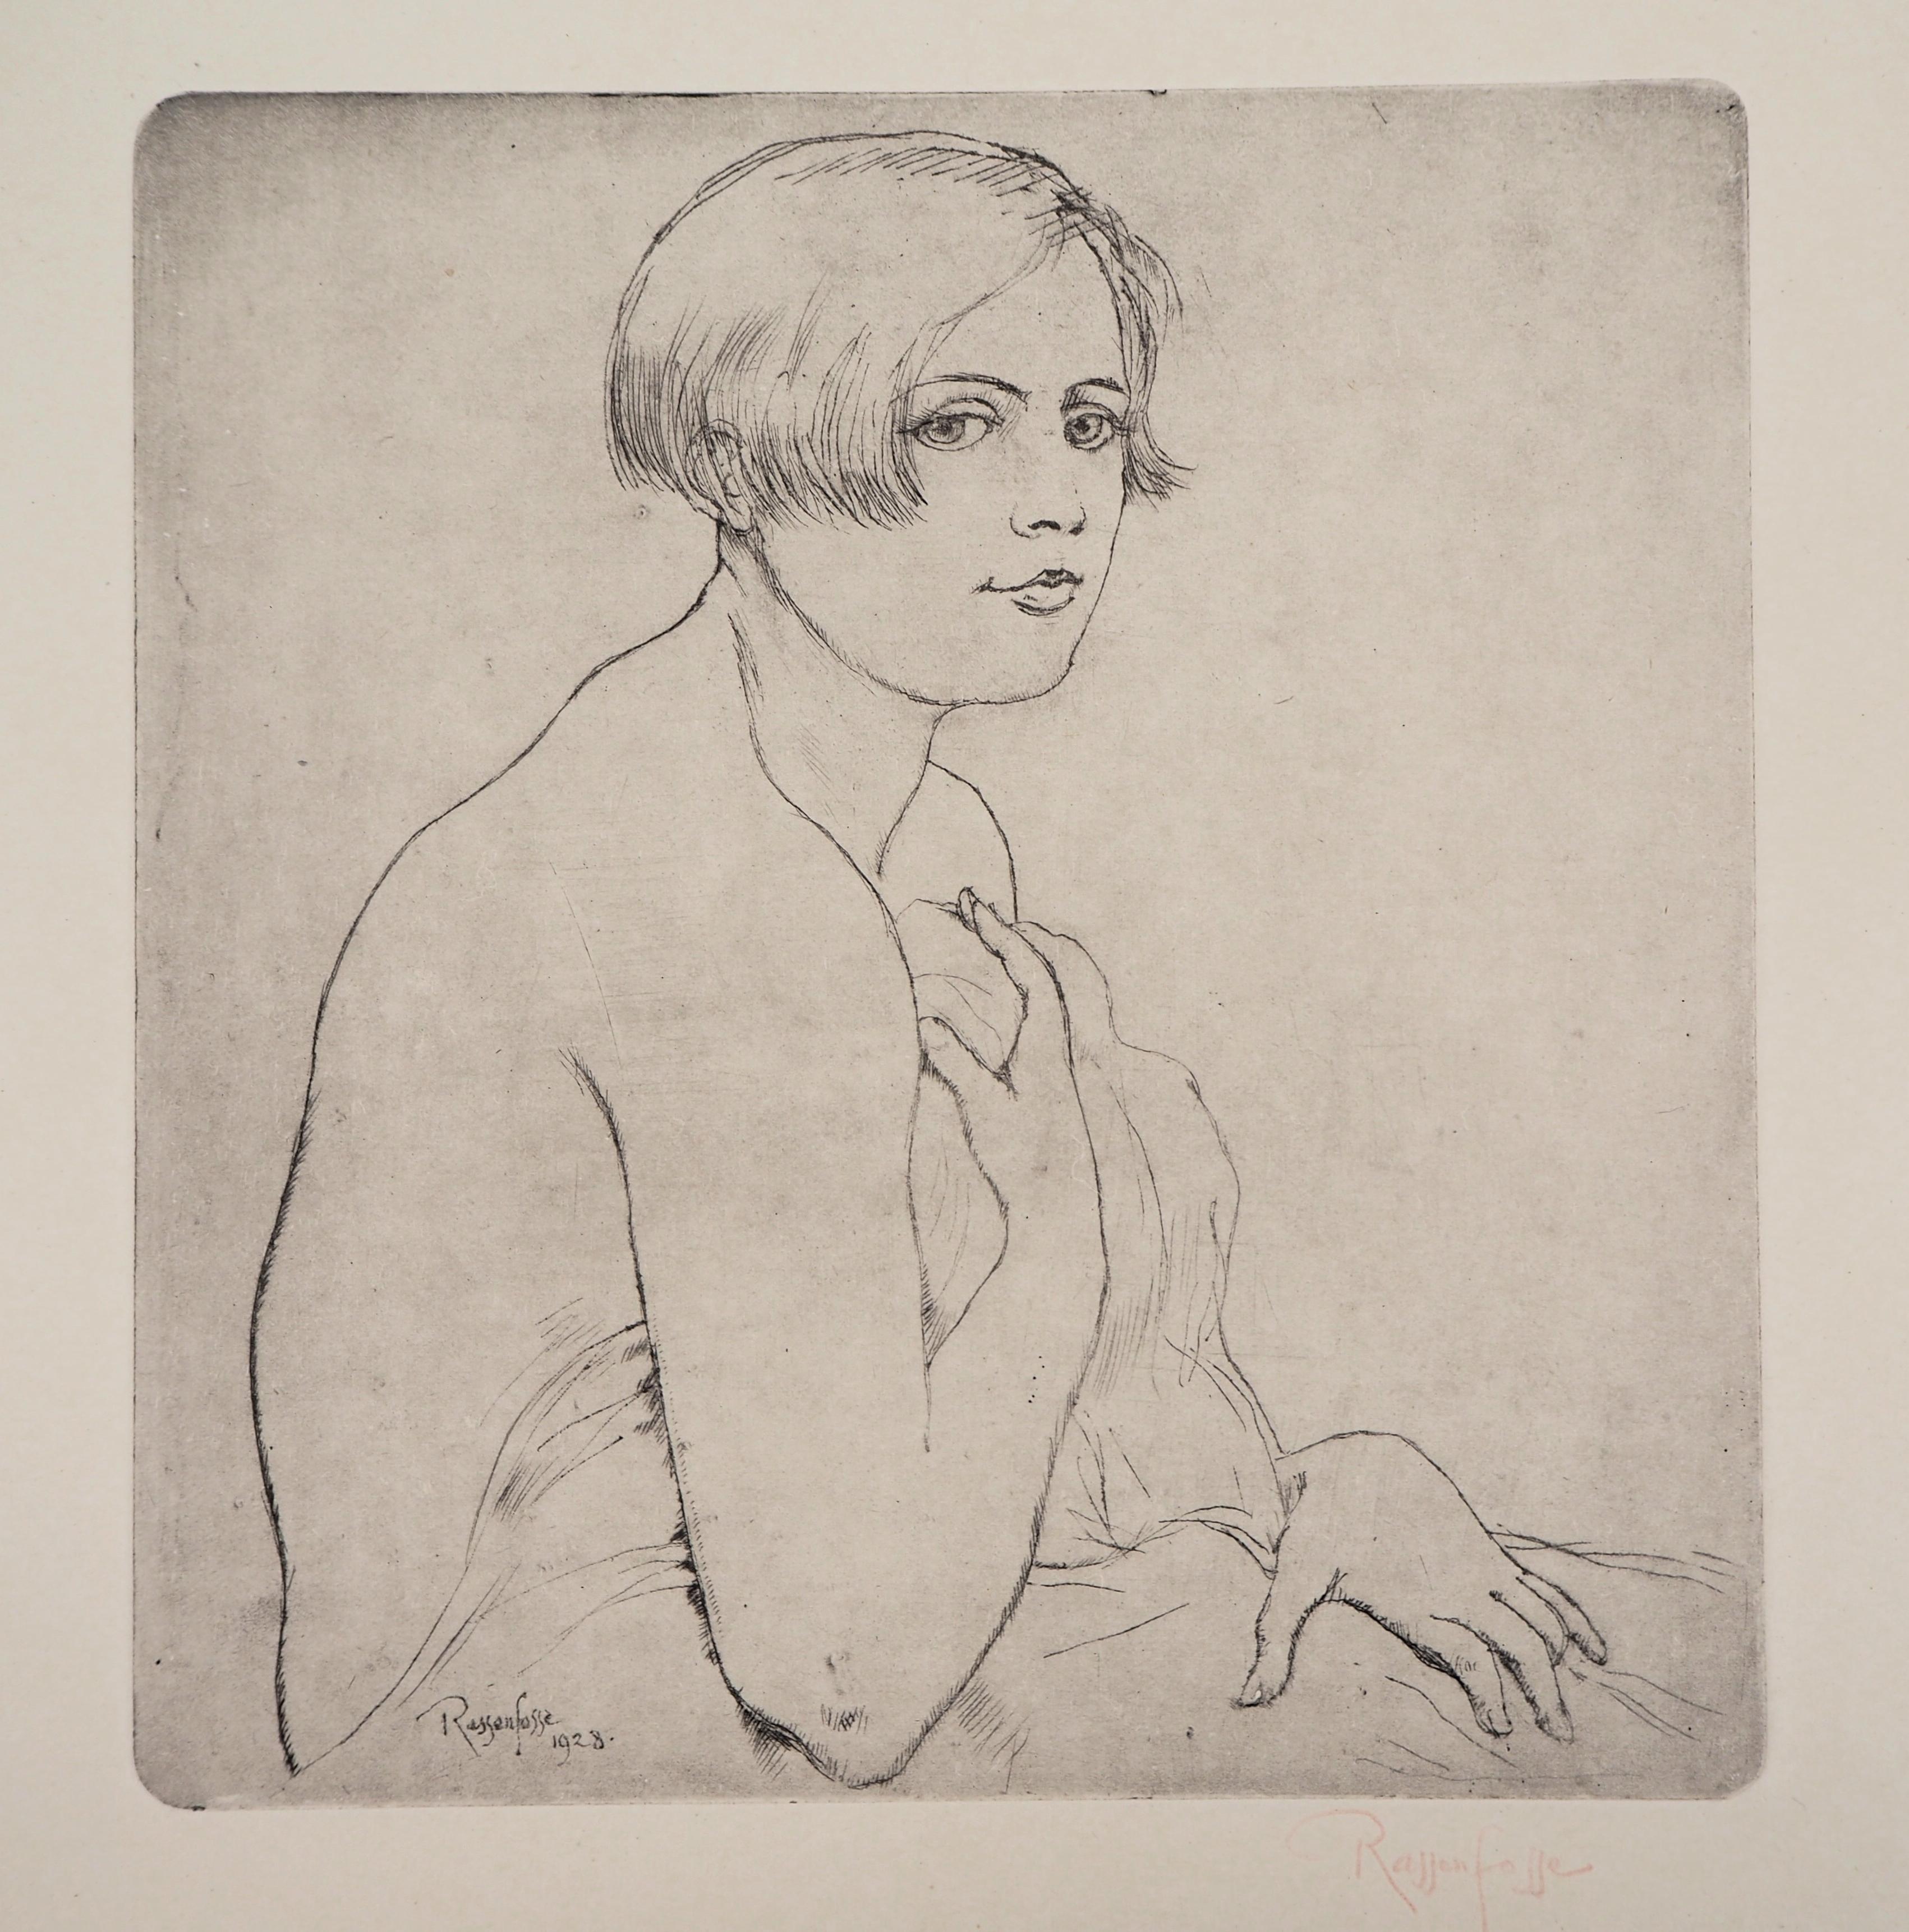 Shy Woman - Original drypoint etching, Handsigned, 1928 - Modern Print by Armand Rassenfosse